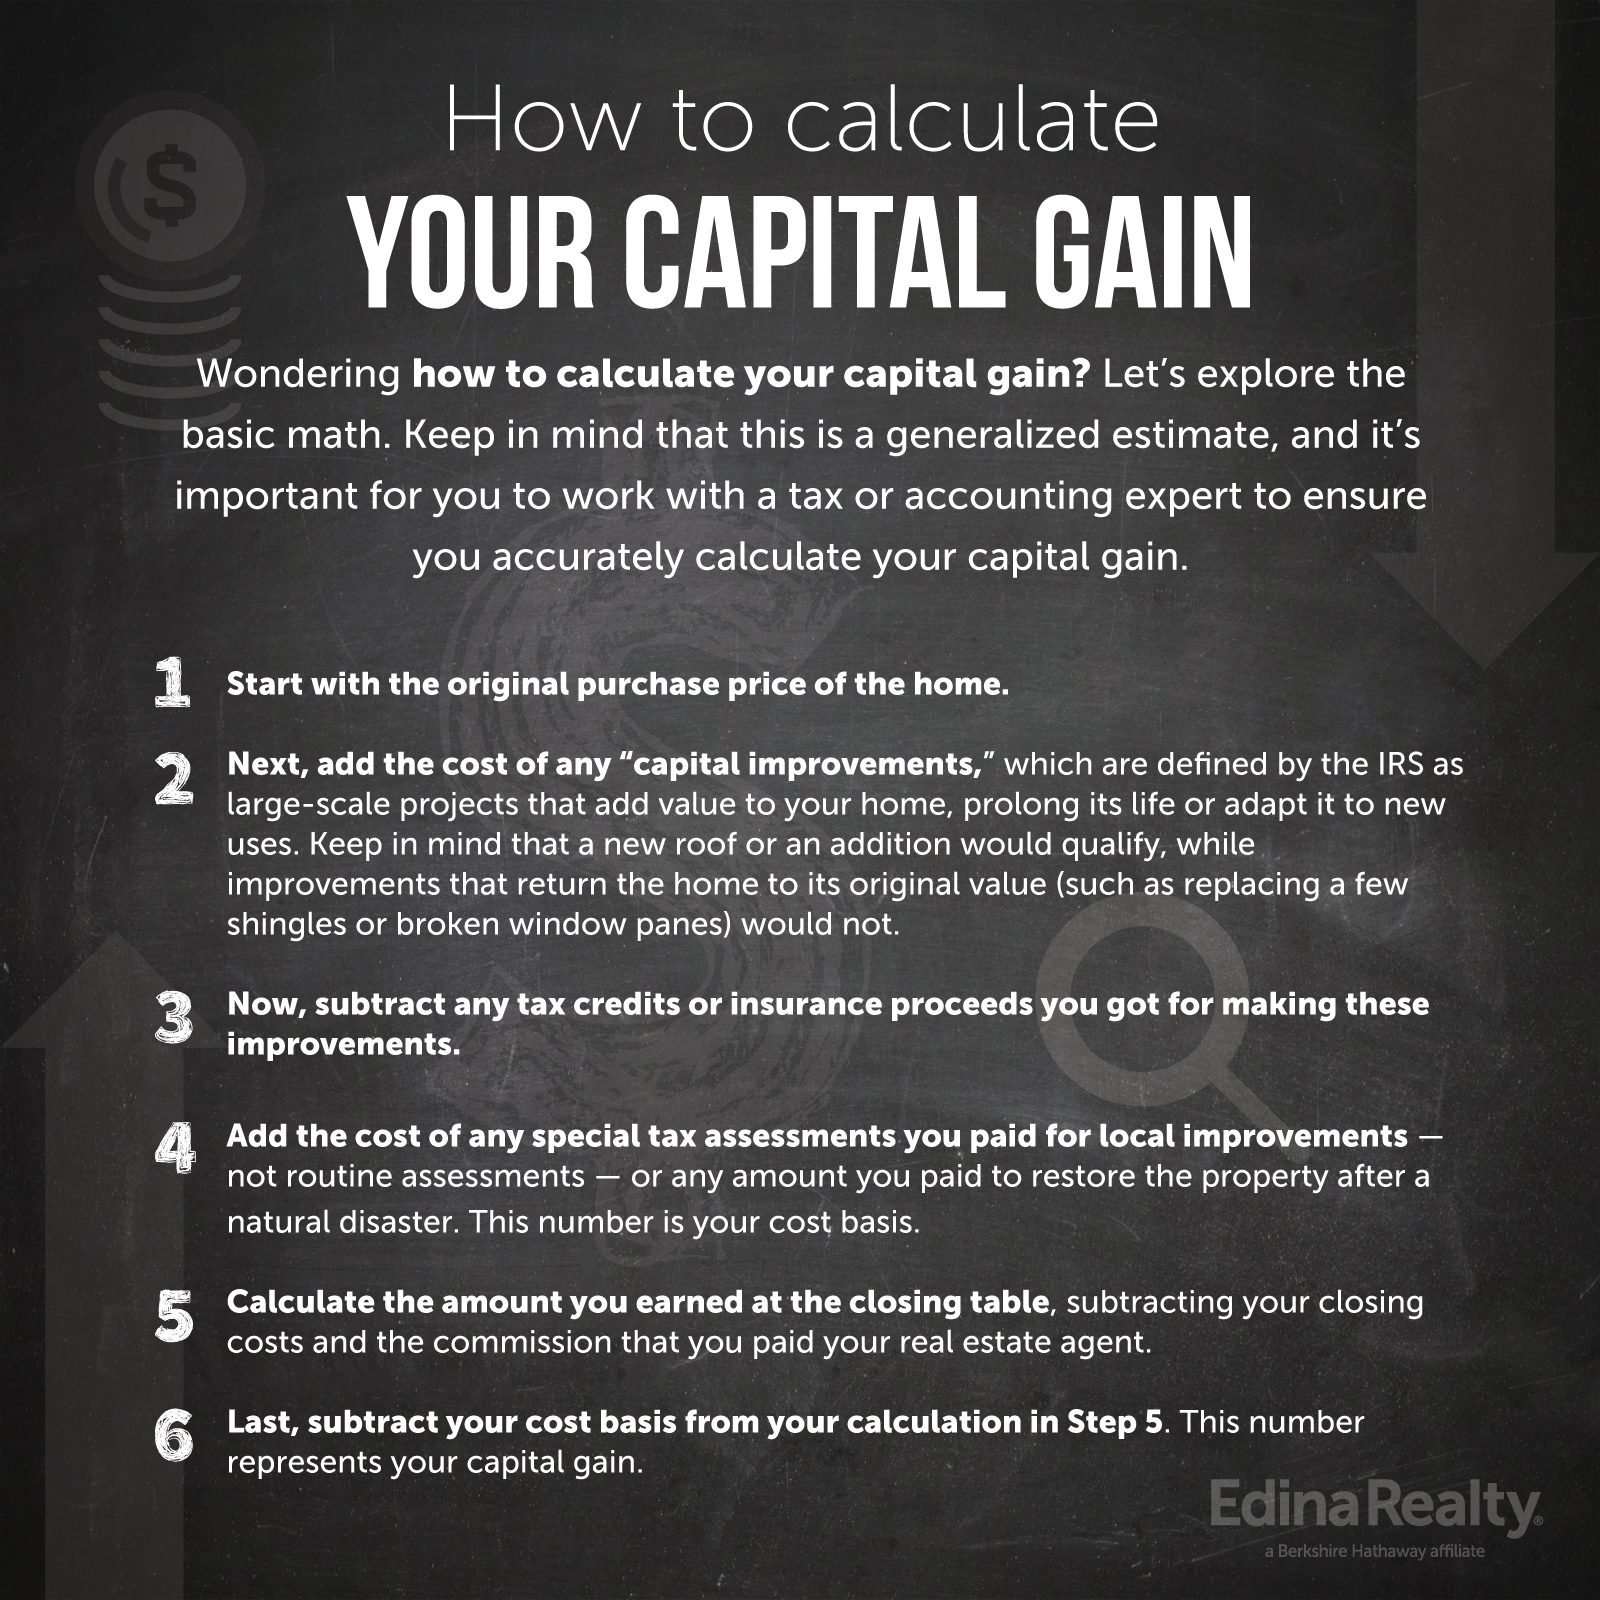 How to calculate capital gains tax